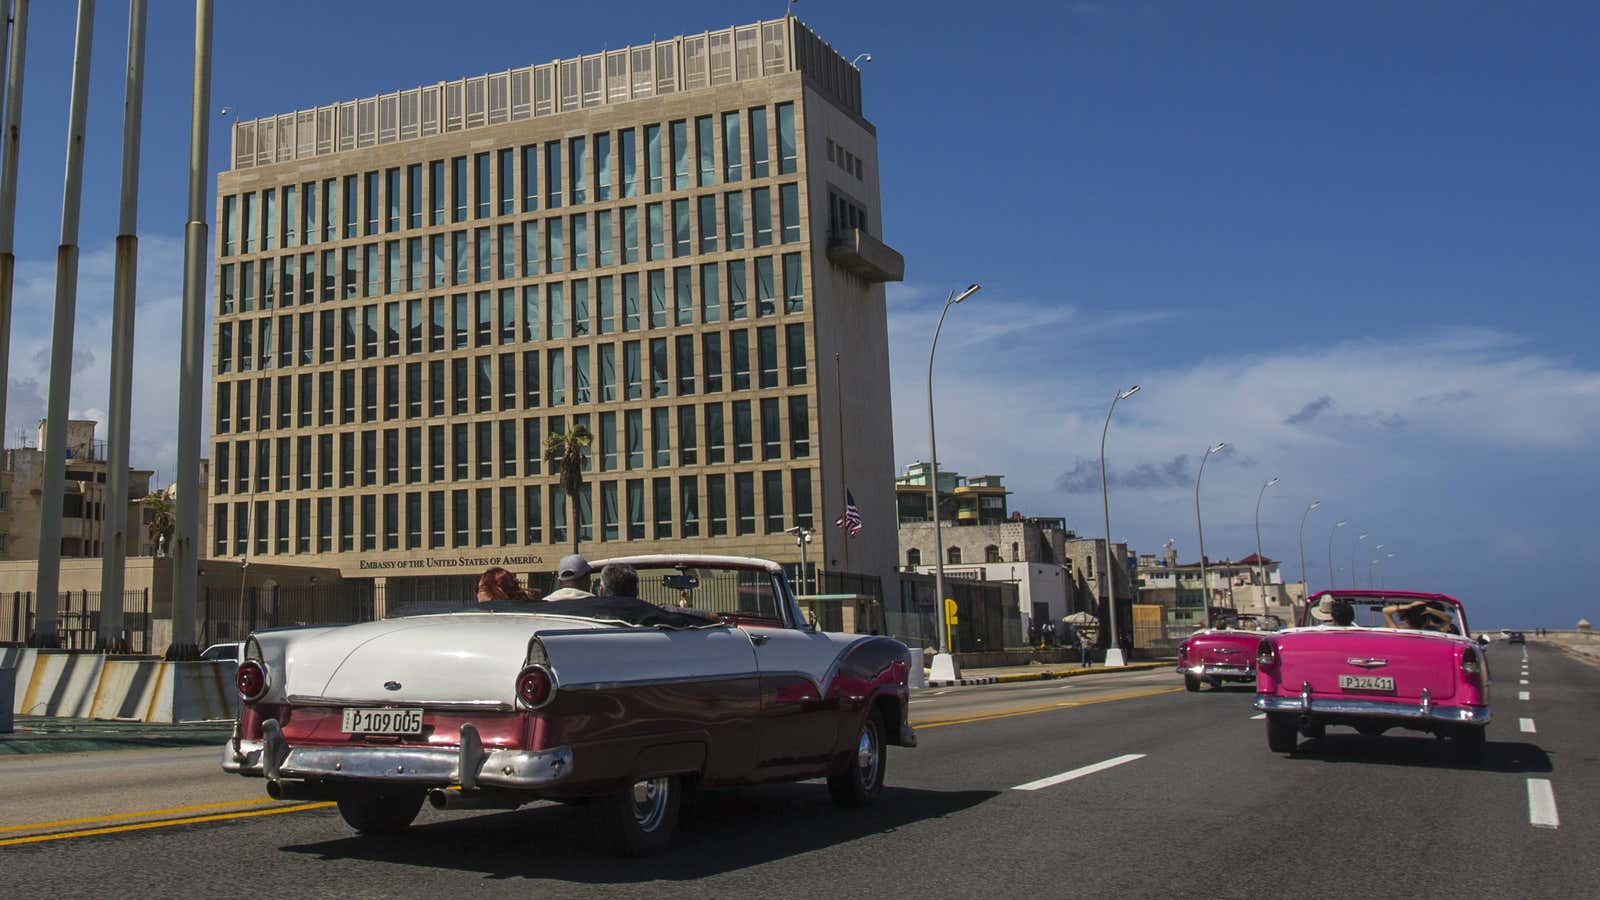 The US investigation is no closer to determining how American diplomats were hurt or by whom at the American embassy in Havana.